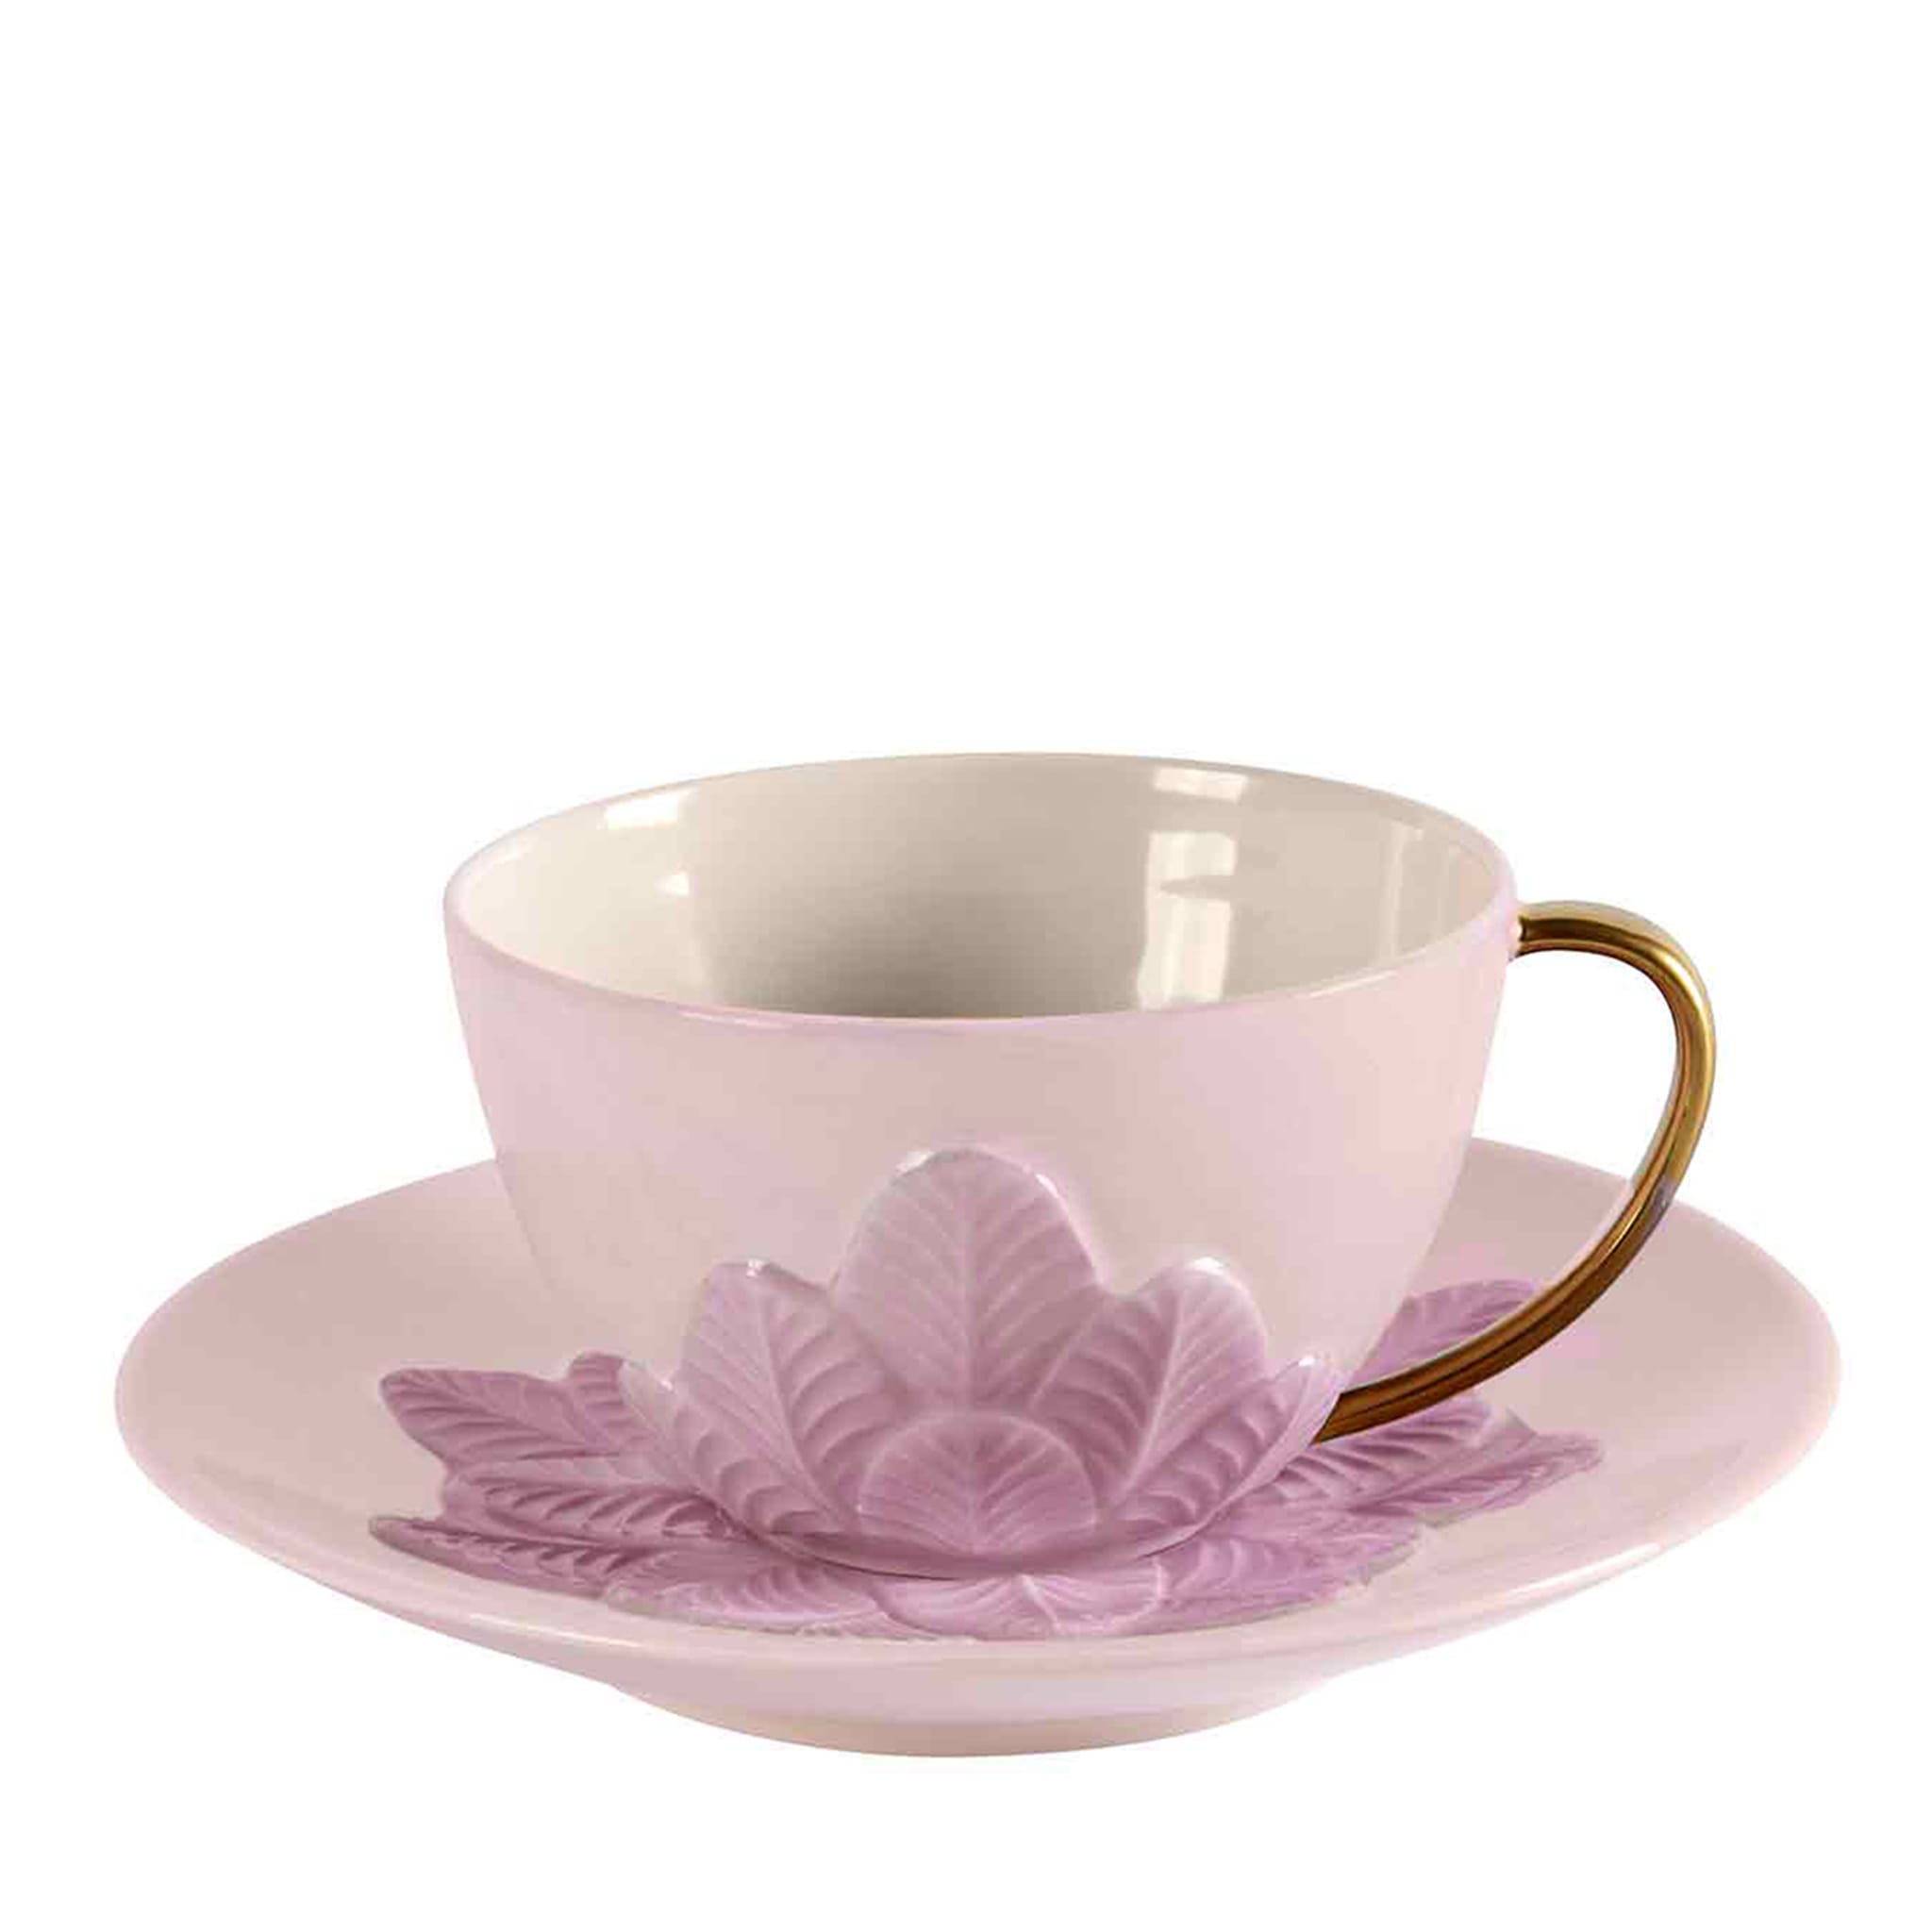 PEACOCK TEA CUP - PINK AND GOLD - Main view